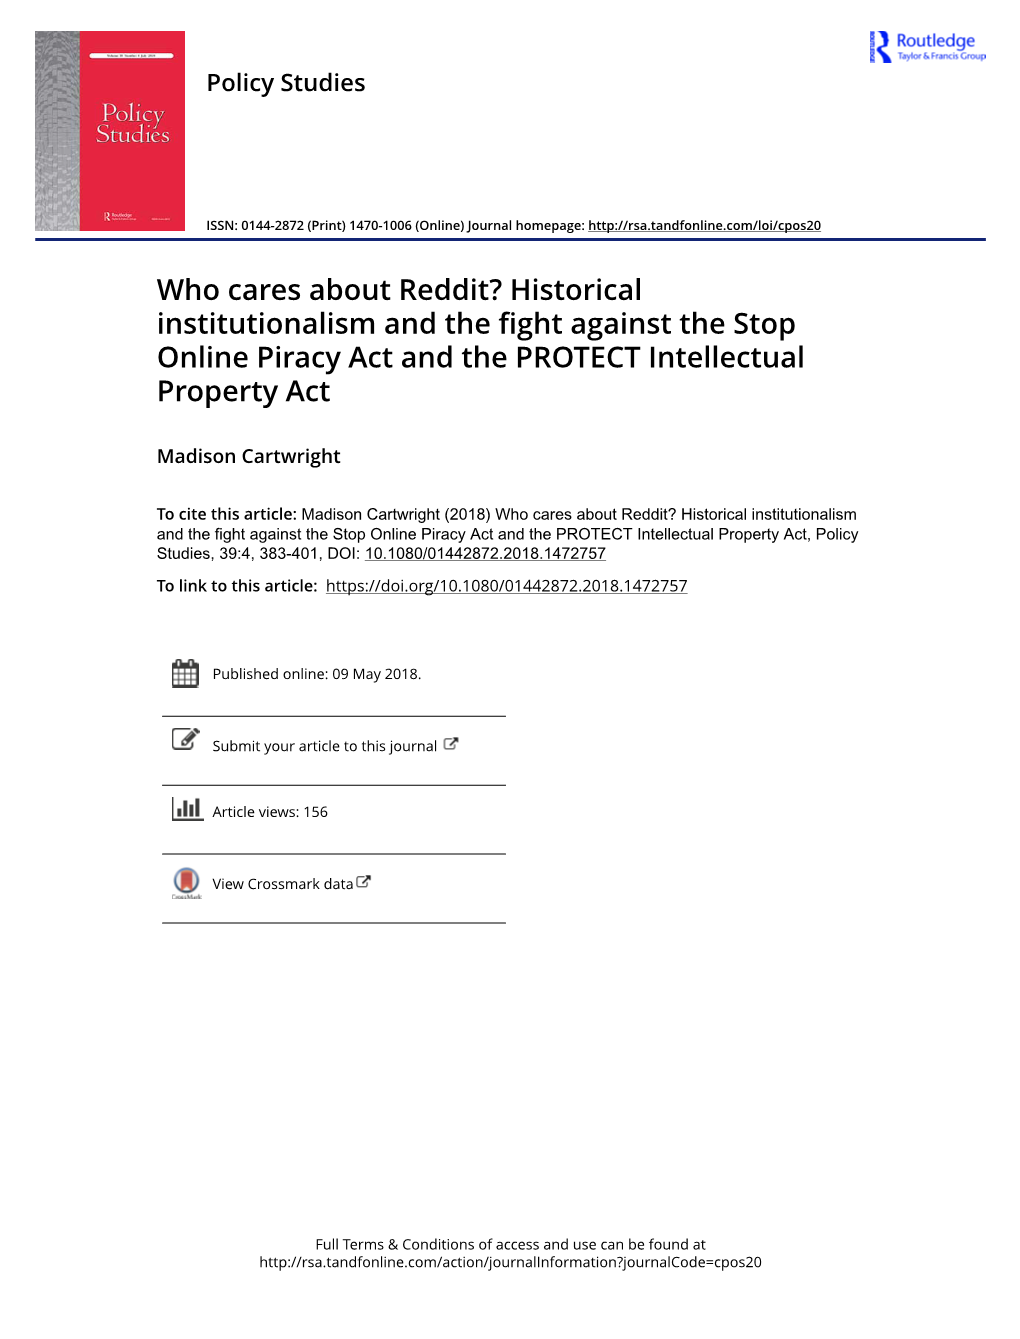 Historical Institutionalism and the Fight Against the Stop Online Piracy Act and the PROTECT Intellectual Property Act